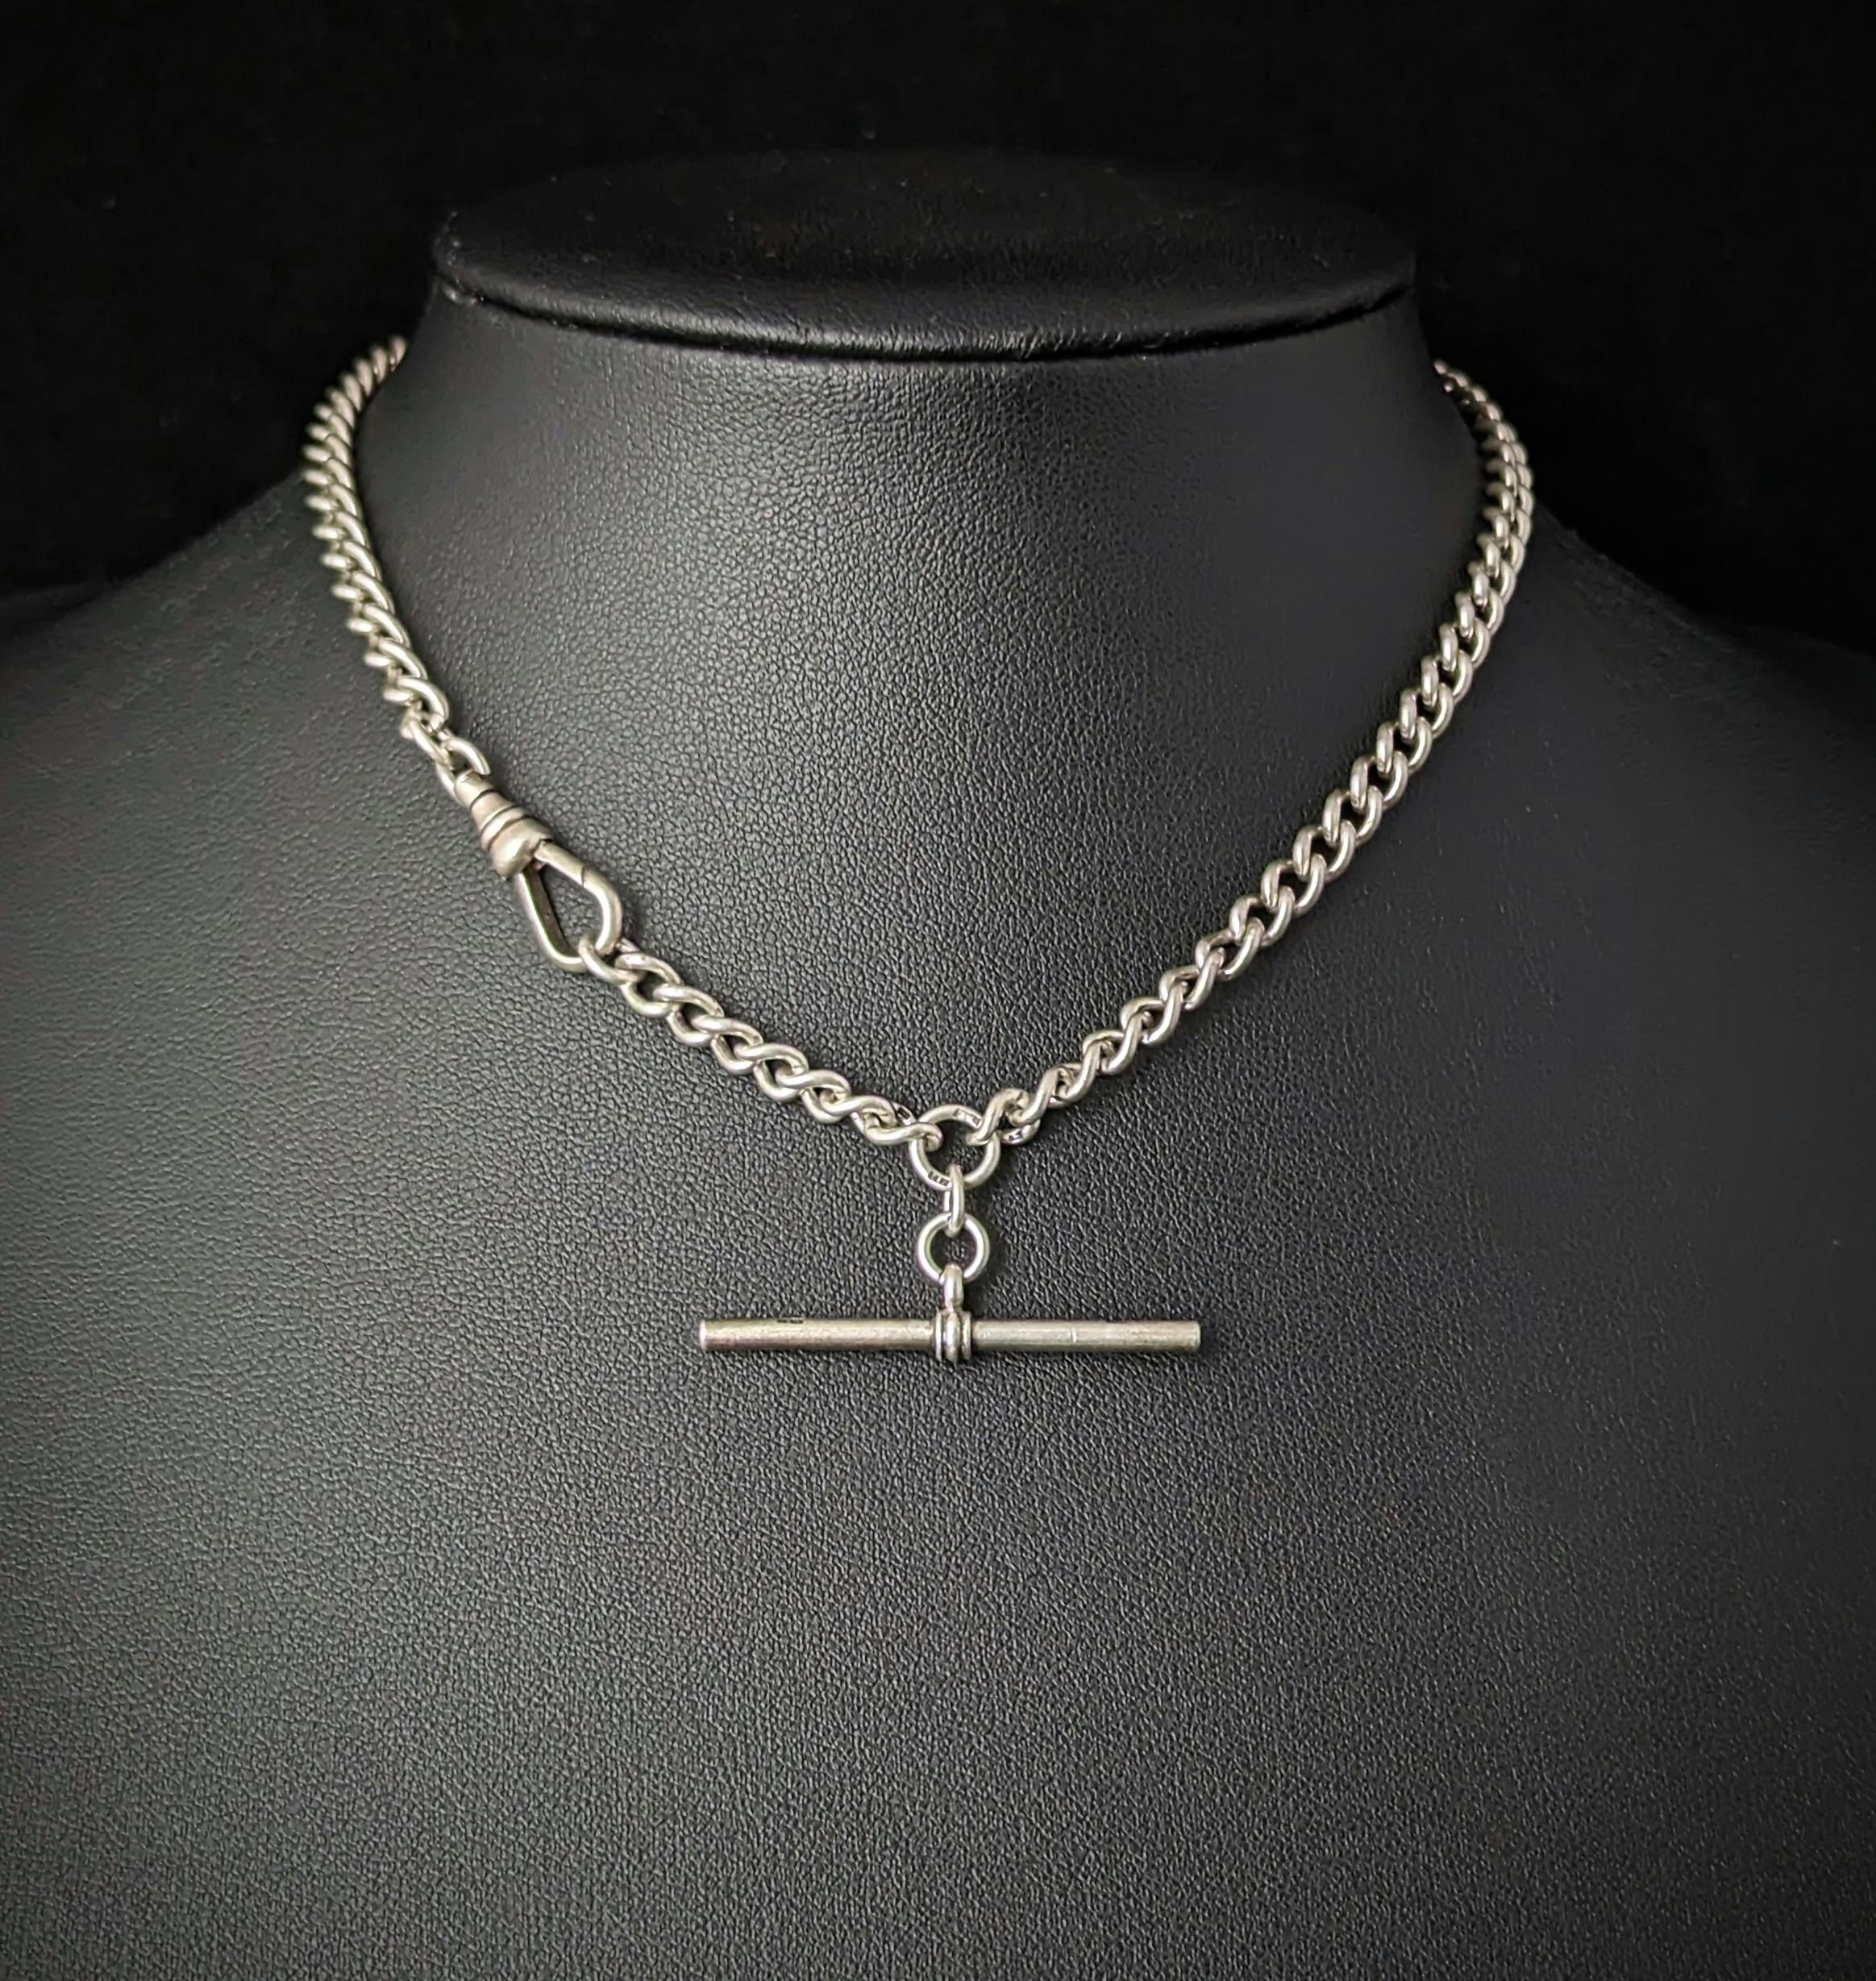 An attractive vintage sterling silver Albert chain or watch chain.

Nice silver graduated curb links with a dog clip fastener to one end and a t bar to the other.

The chain is made from sterling silver and the fittings are also solid silver.

A